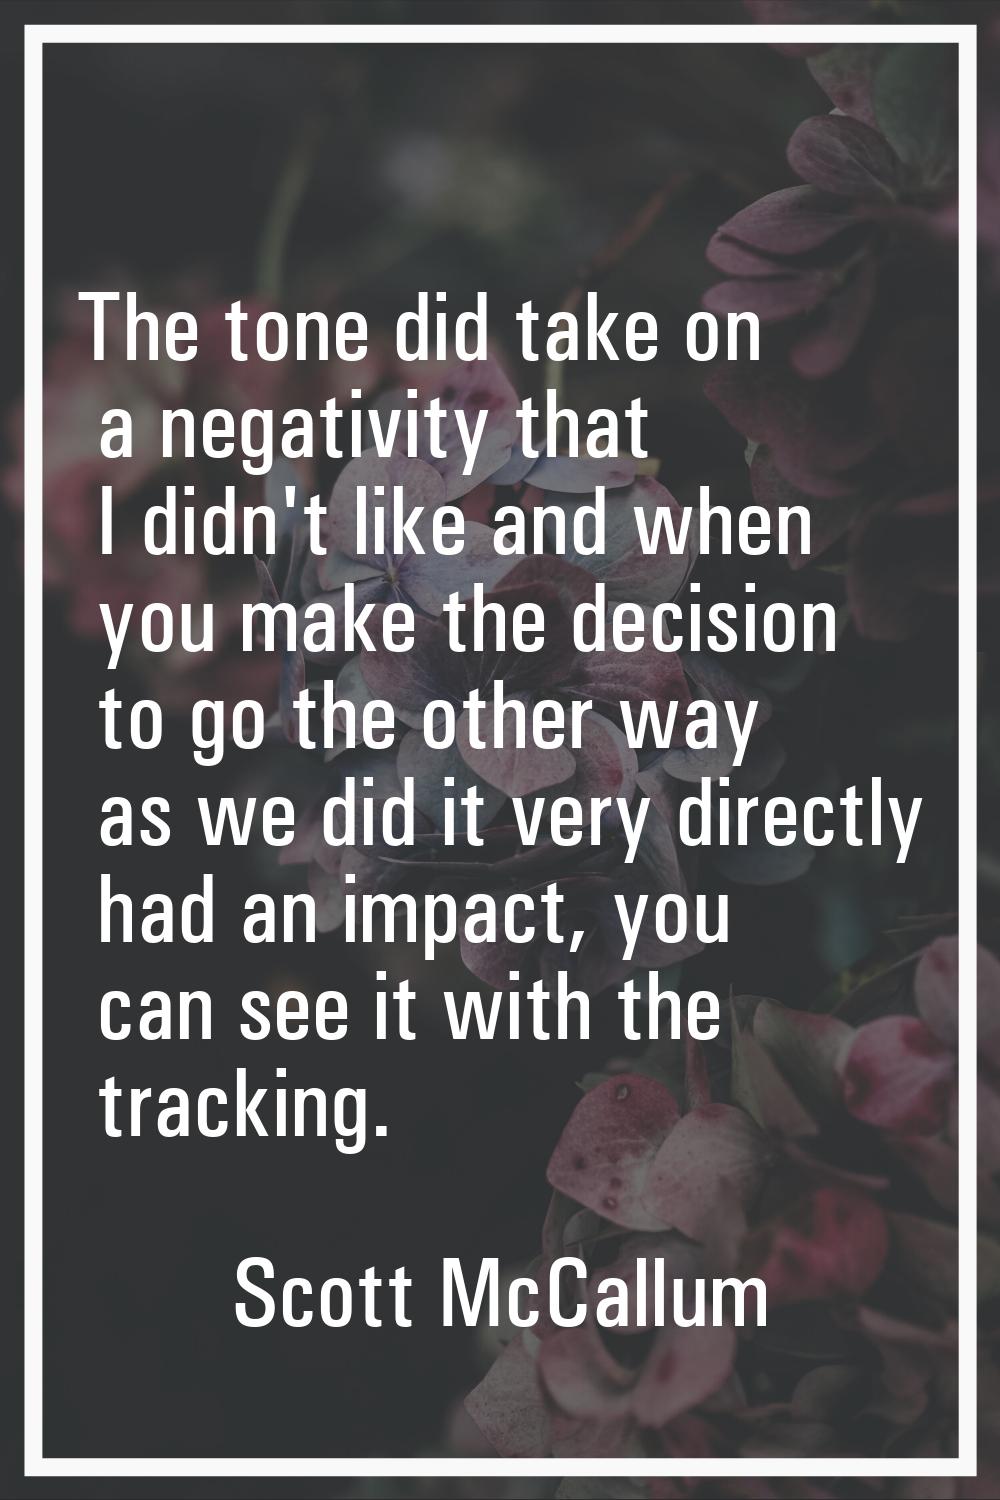 The tone did take on a negativity that I didn't like and when you make the decision to go the other